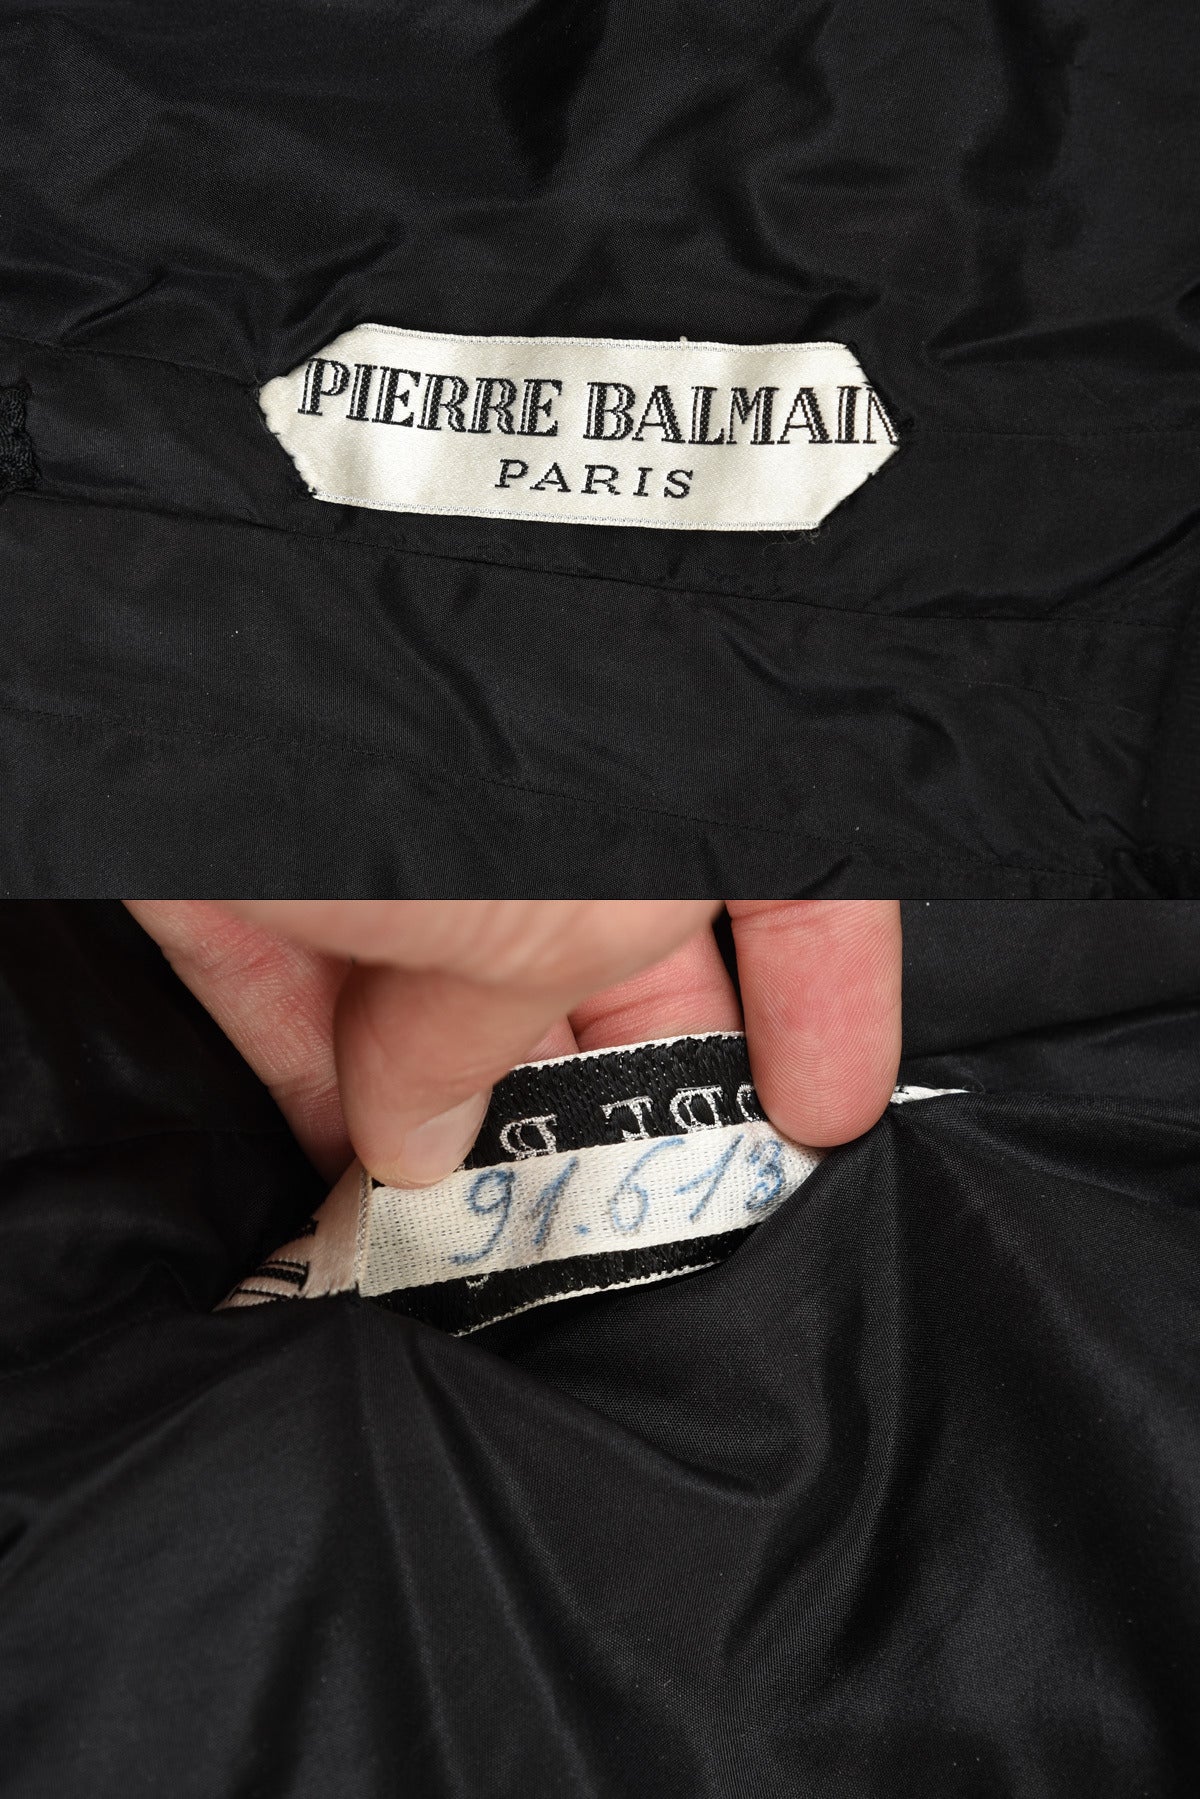 1957 Pierre Balmain Haute Couture Cocktail Dress with Lesage Embroidery For Sale 2